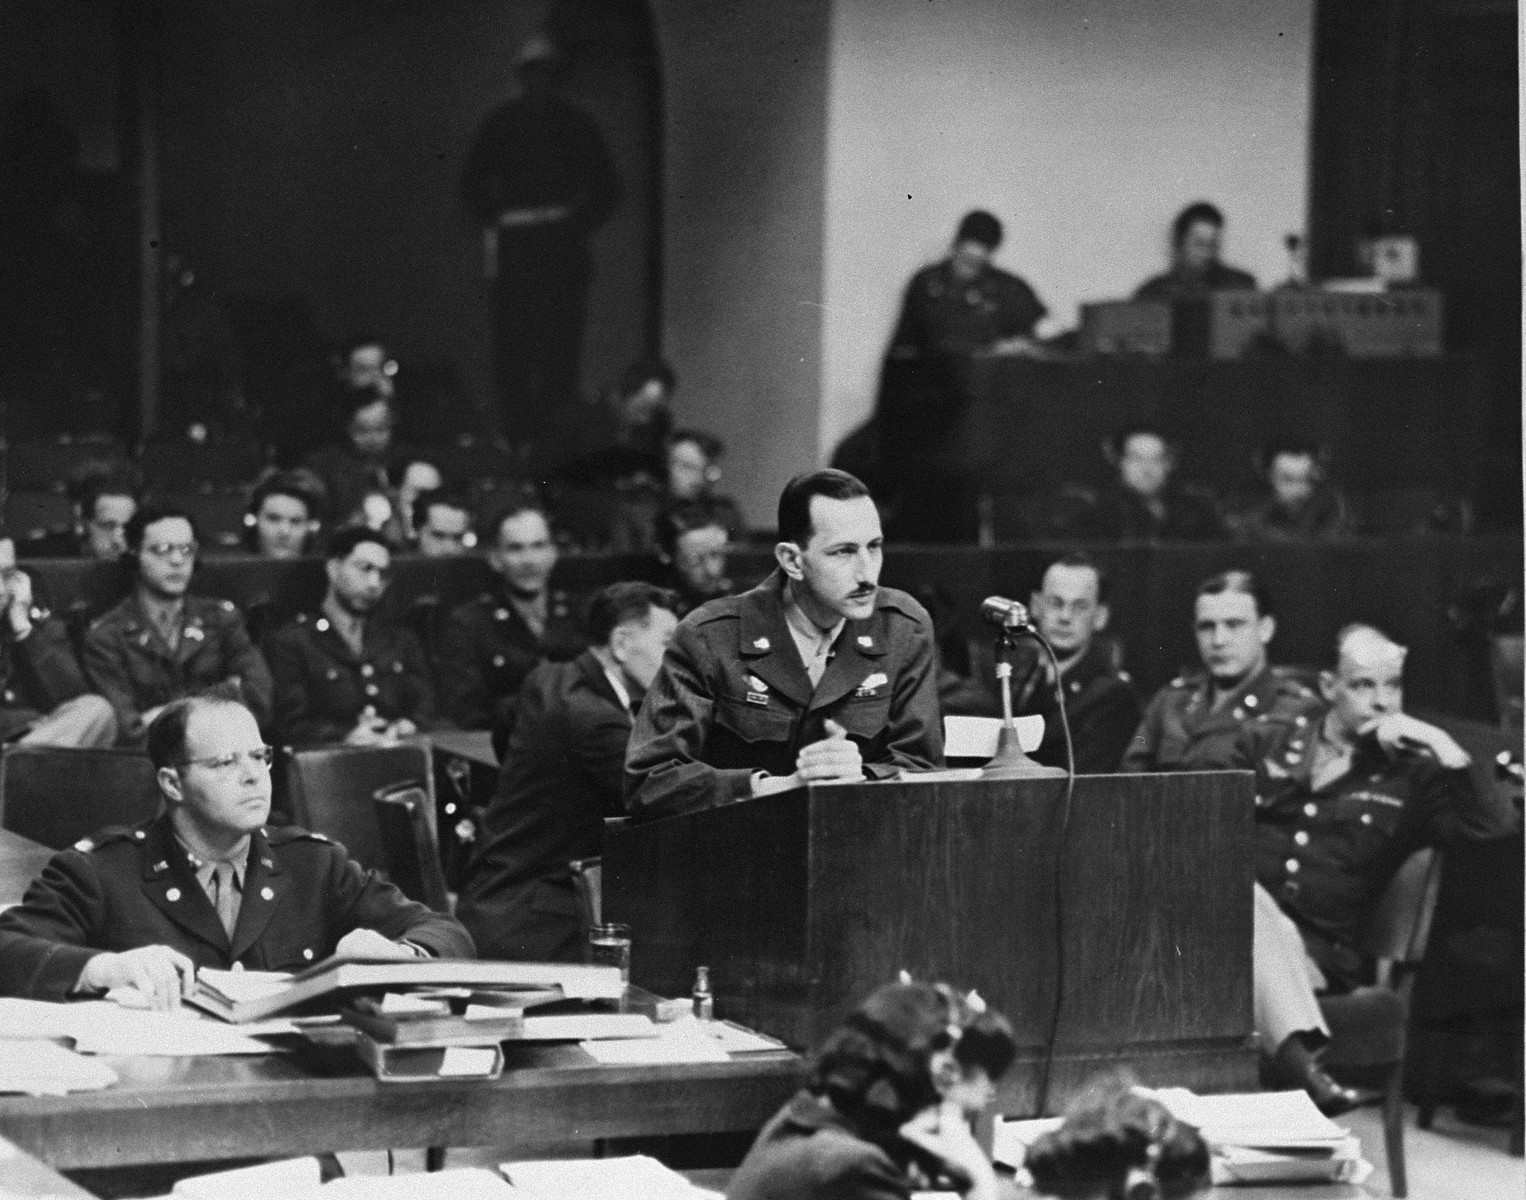 Assistant U.S. trial counsel Walter W. Brudno presents the prosecution's case against Alfred Rosenberg at the International Military Tribunal trial of war criminals at Nuremberg.